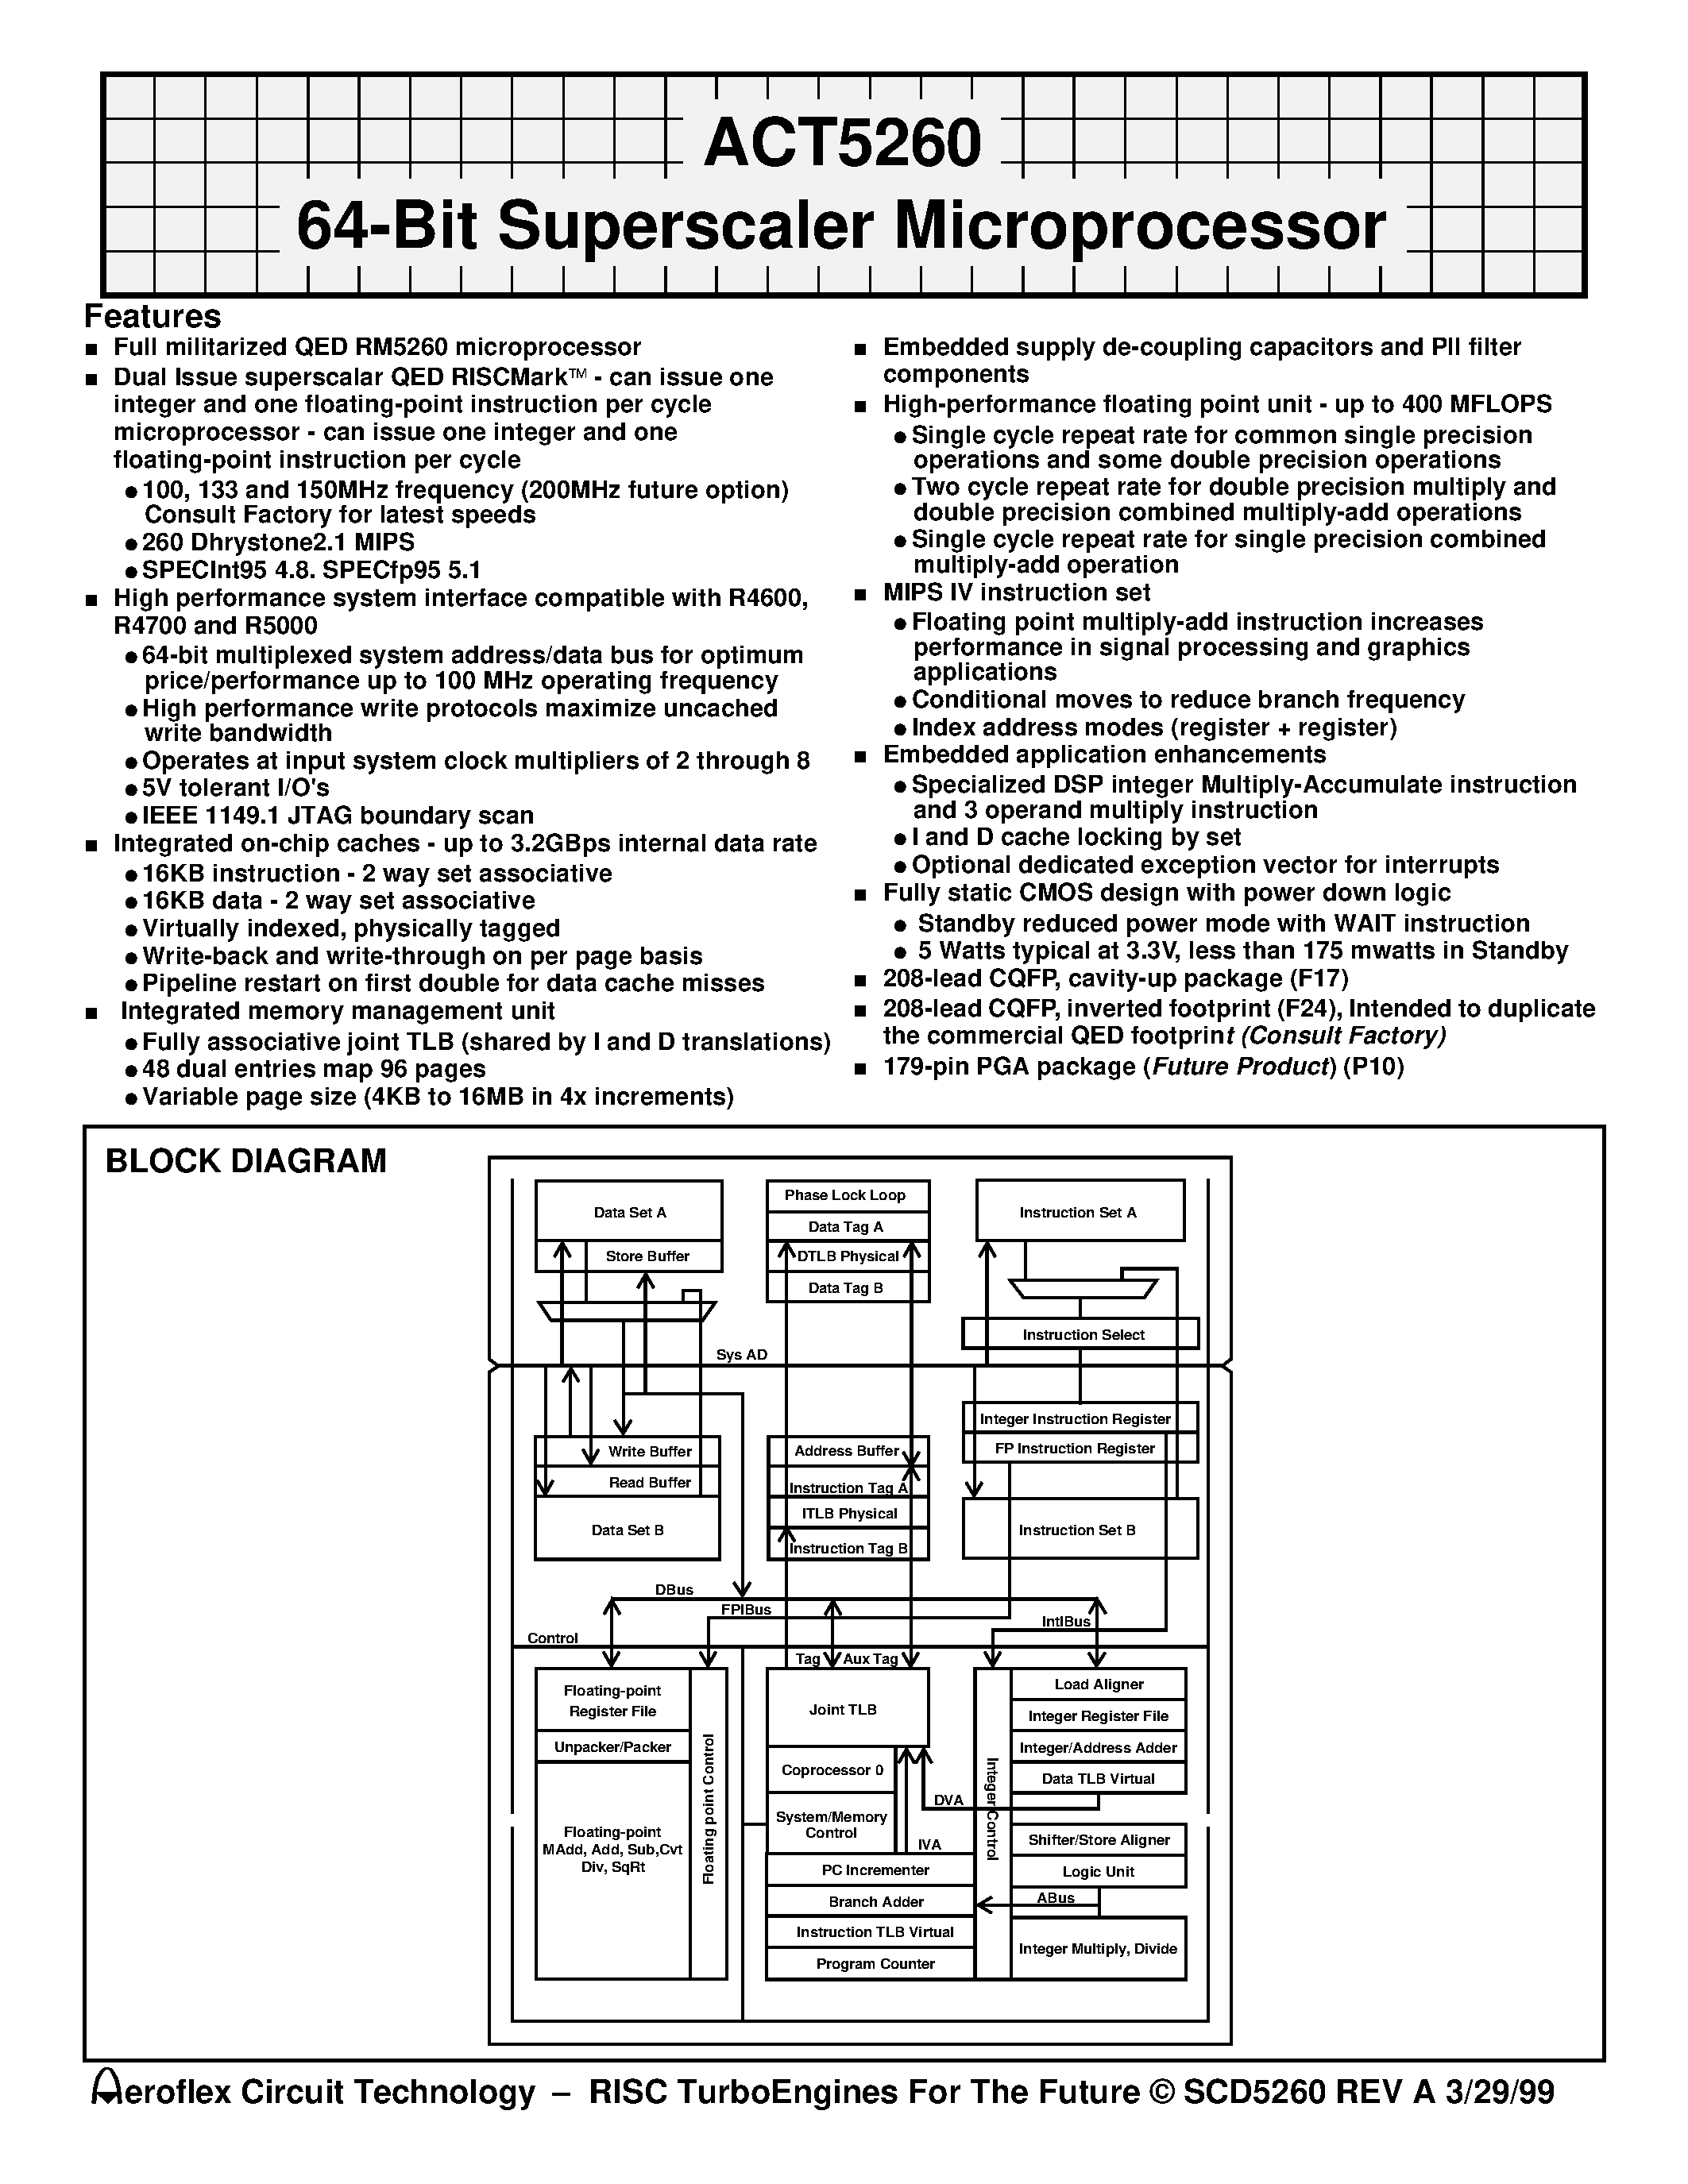 Datasheet ACT-5260PC-100F17C - ACT5260 64-Bit Superscaler Microprocessor page 1